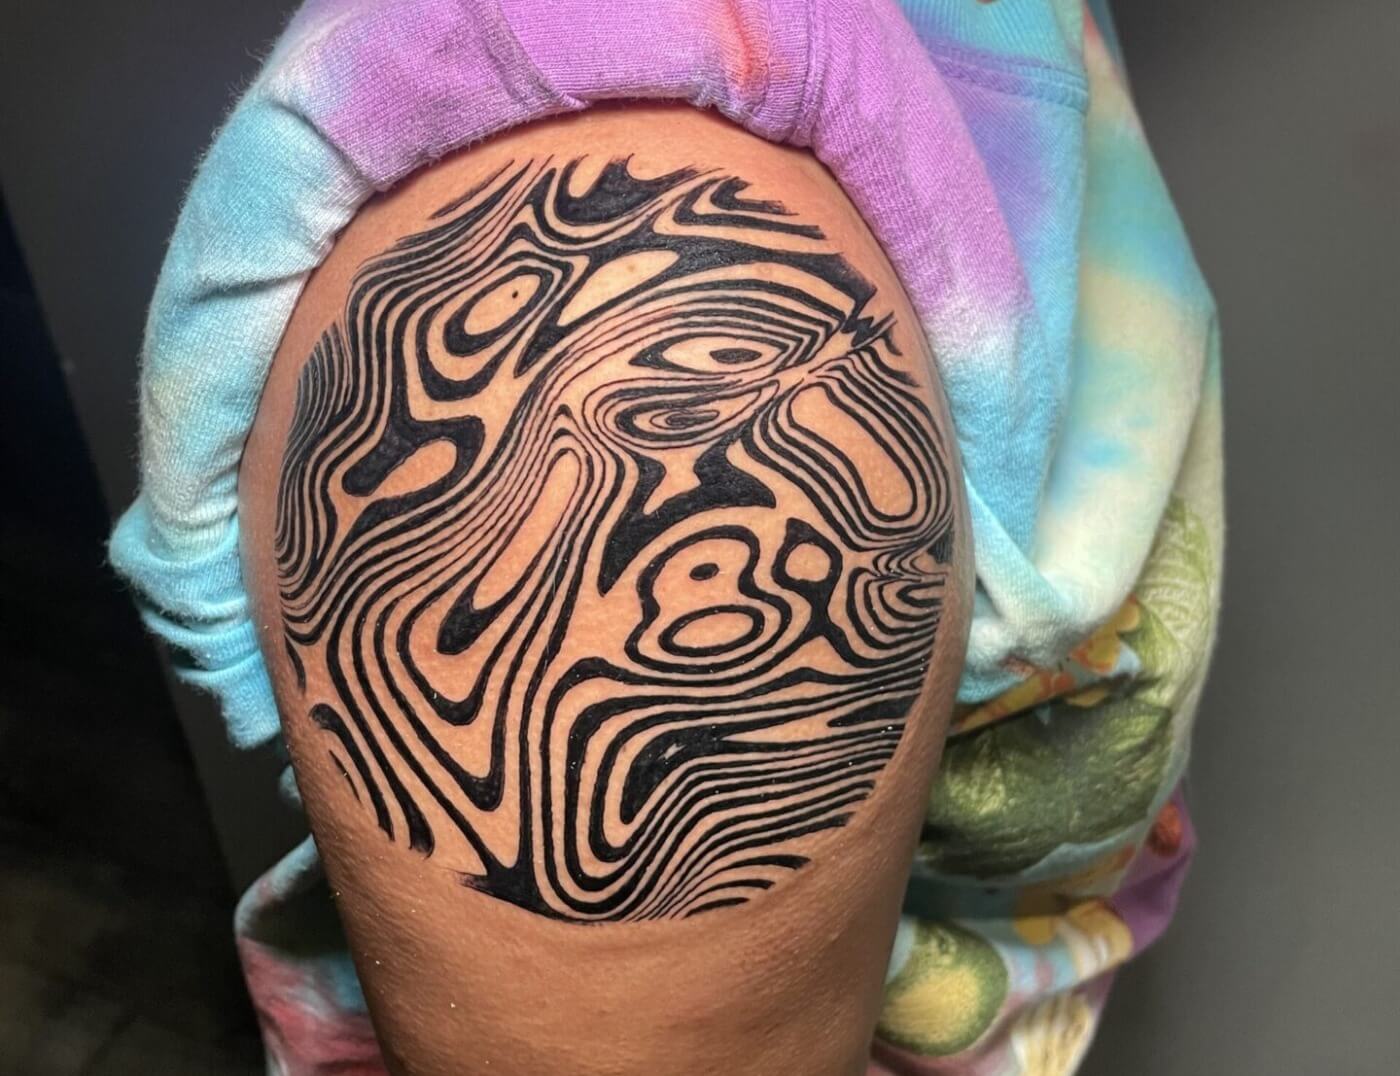 Abstract tattoo inked by Lyric, The Artist at Iron Palm Tattoos & body Piercing in downtown Atlanta. Walk-Ins are accepted. Call 404-973-7828 or come by for a free consultation.